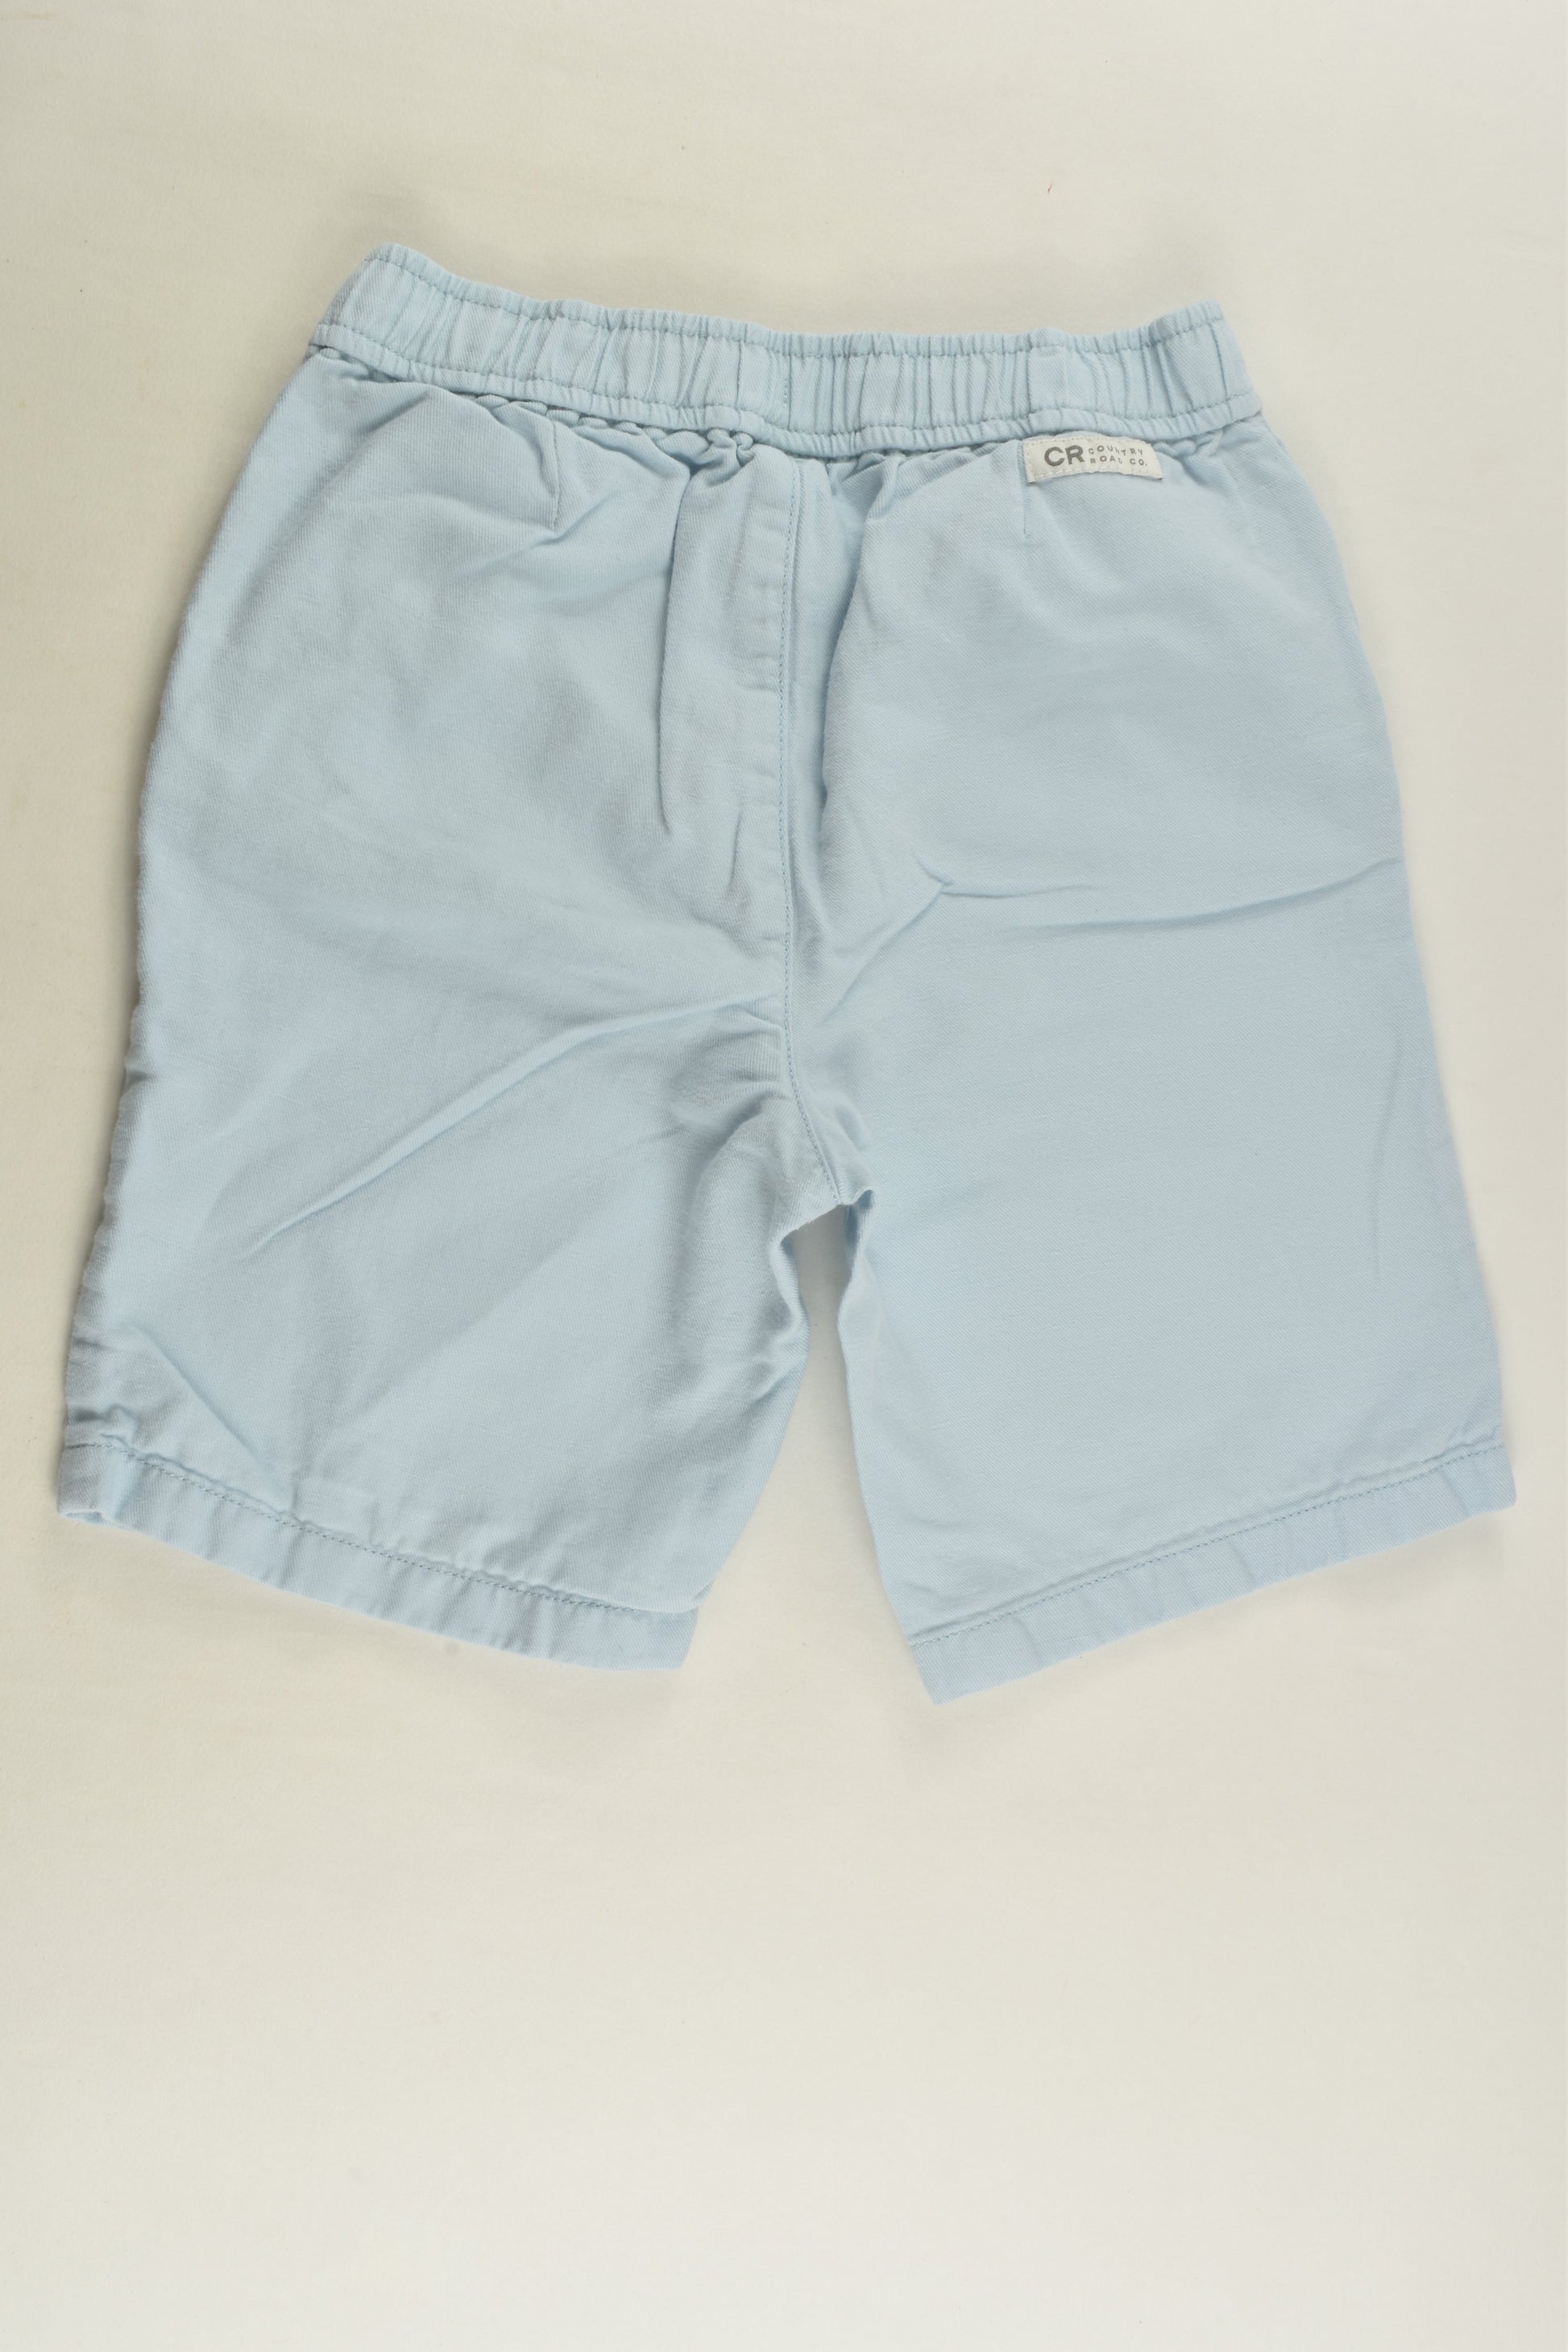 Country Road Size 6 Linen Blend Shorts